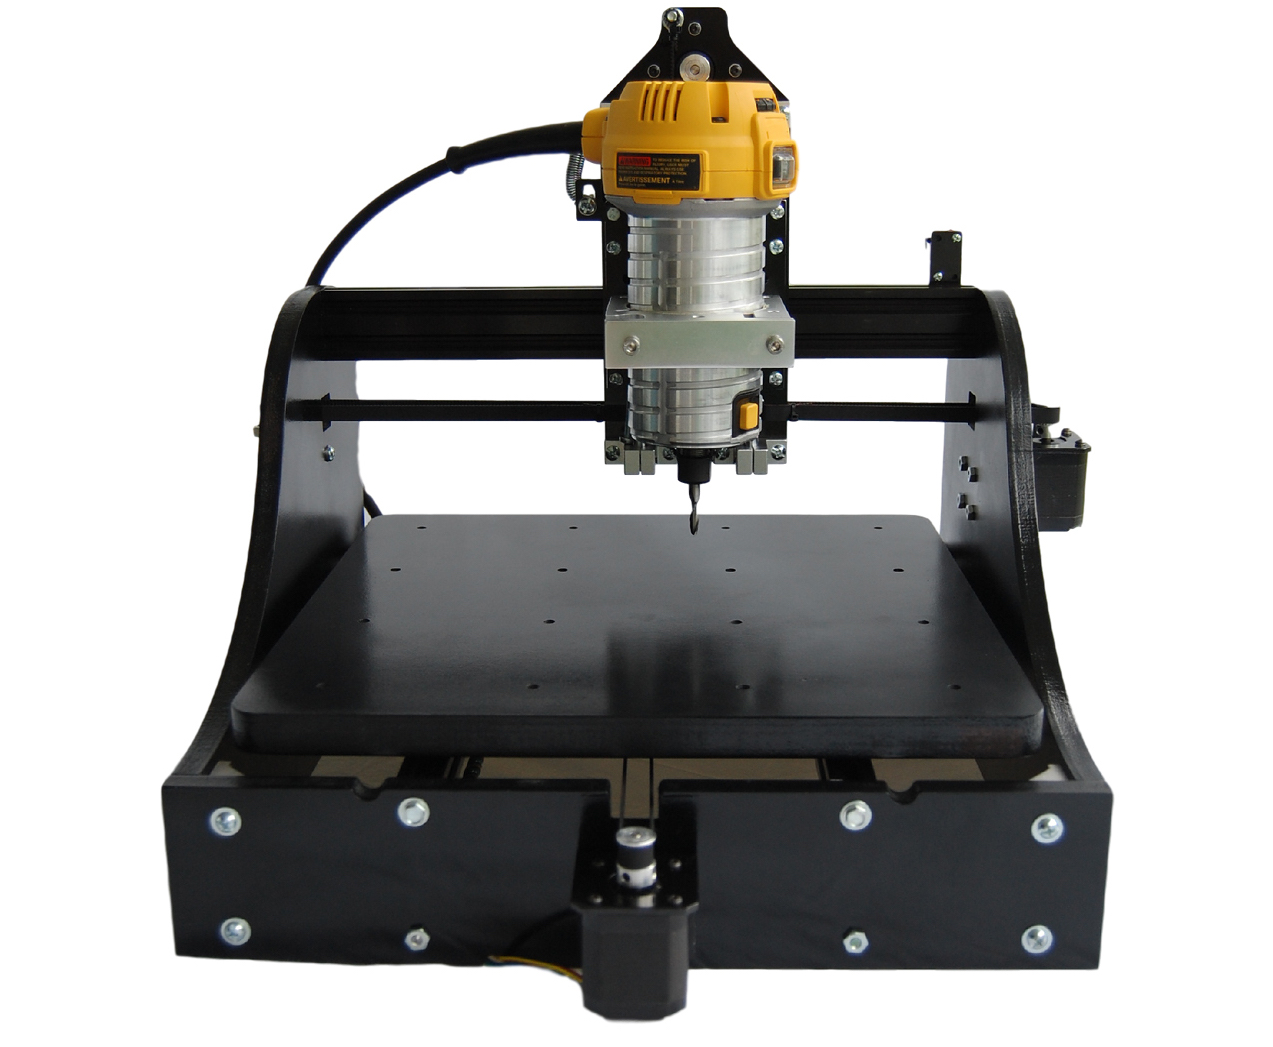  An inexpensive 3D milling machine 